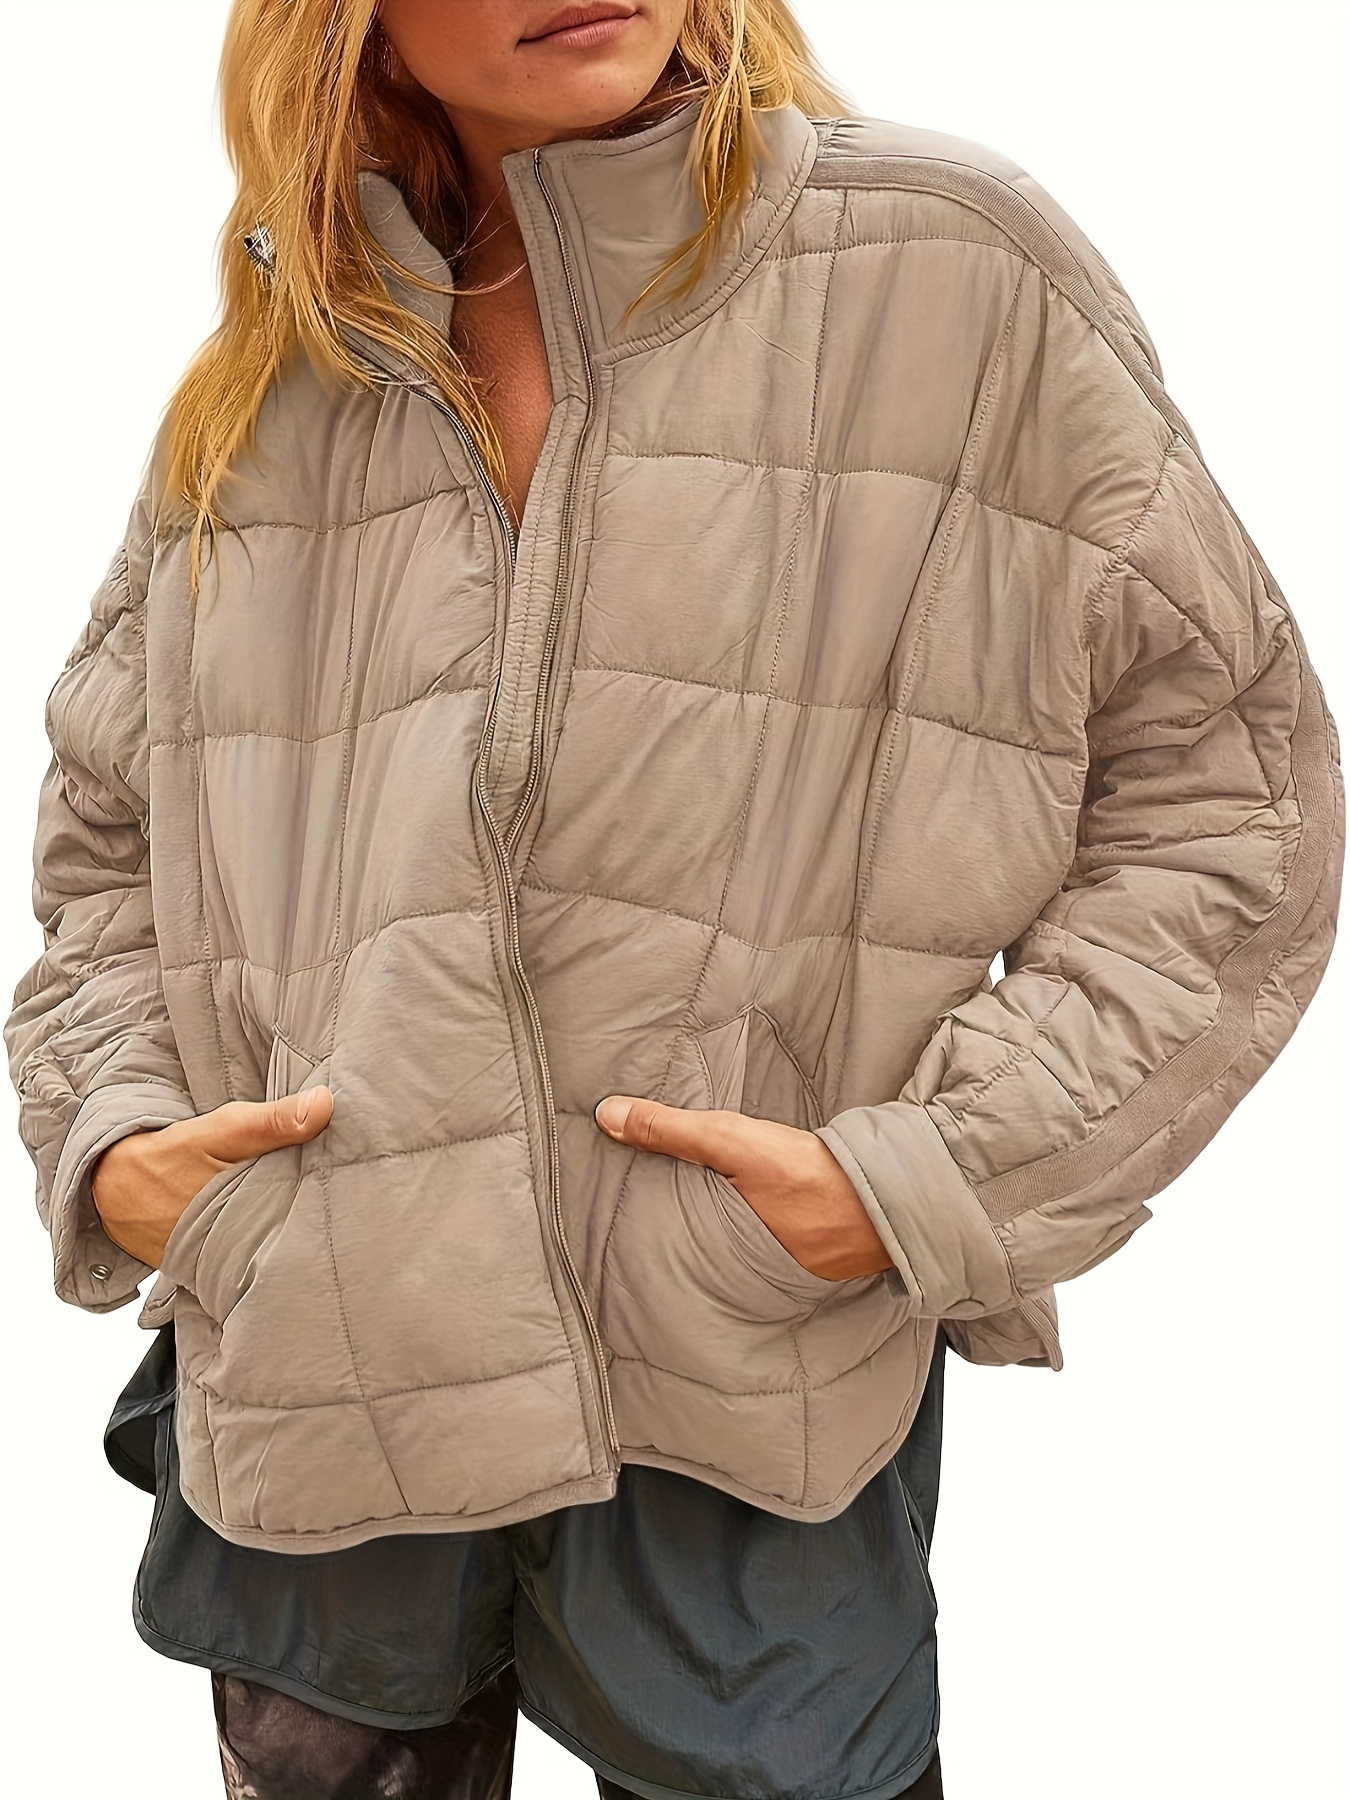 Hooded puffer jacket - Cream/Holographic - Ladies